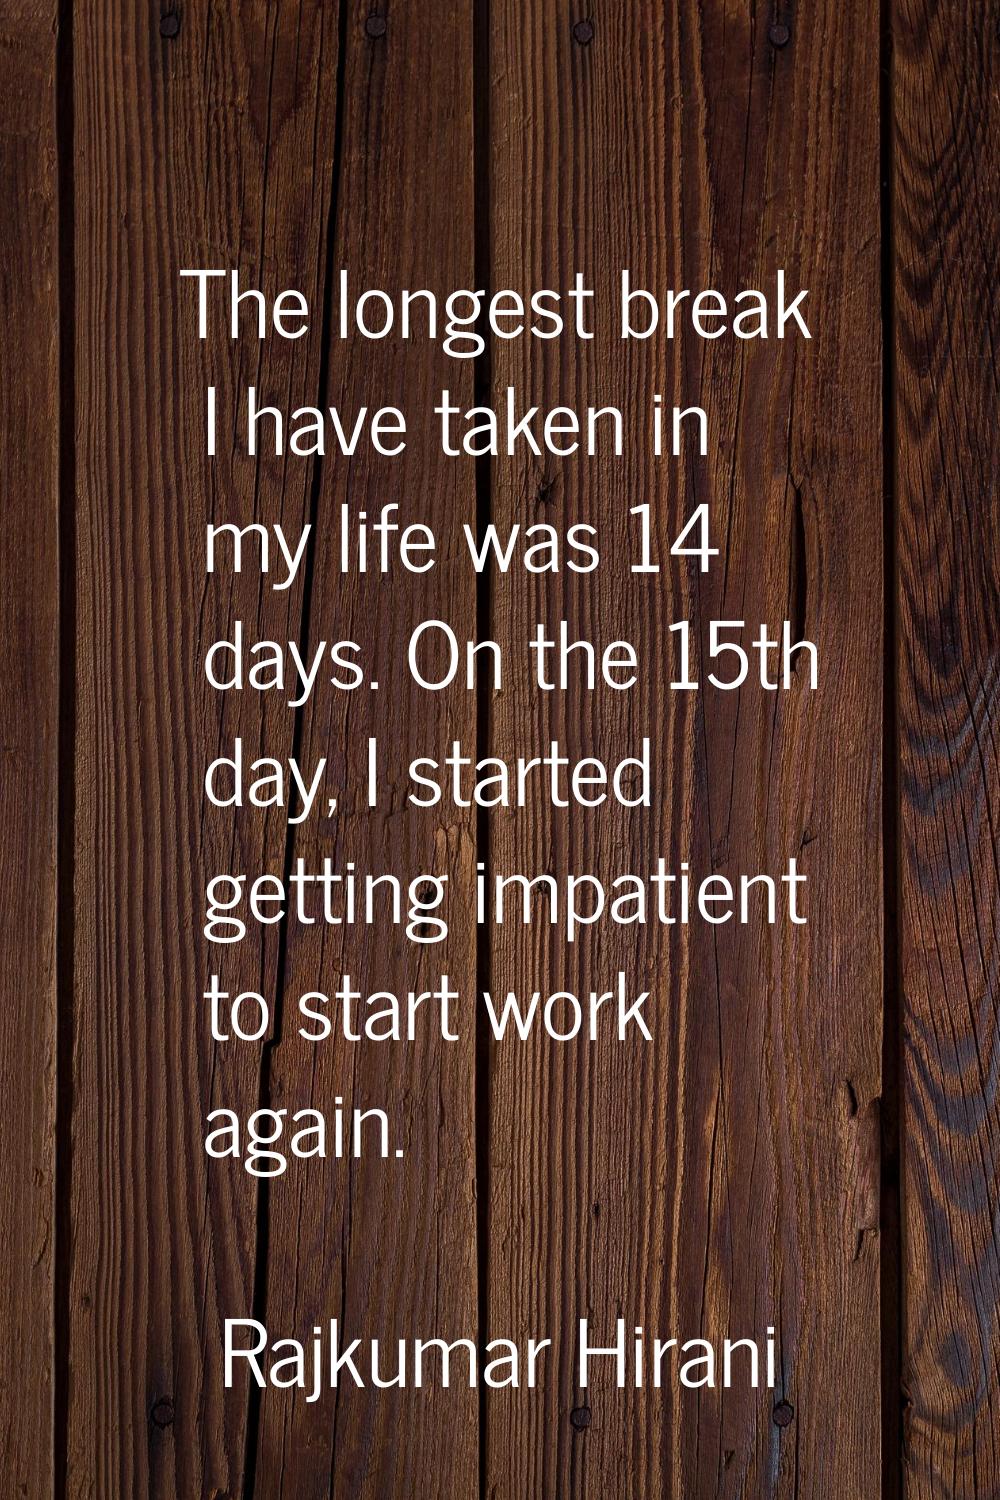 The longest break I have taken in my life was 14 days. On the 15th day, I started getting impatient